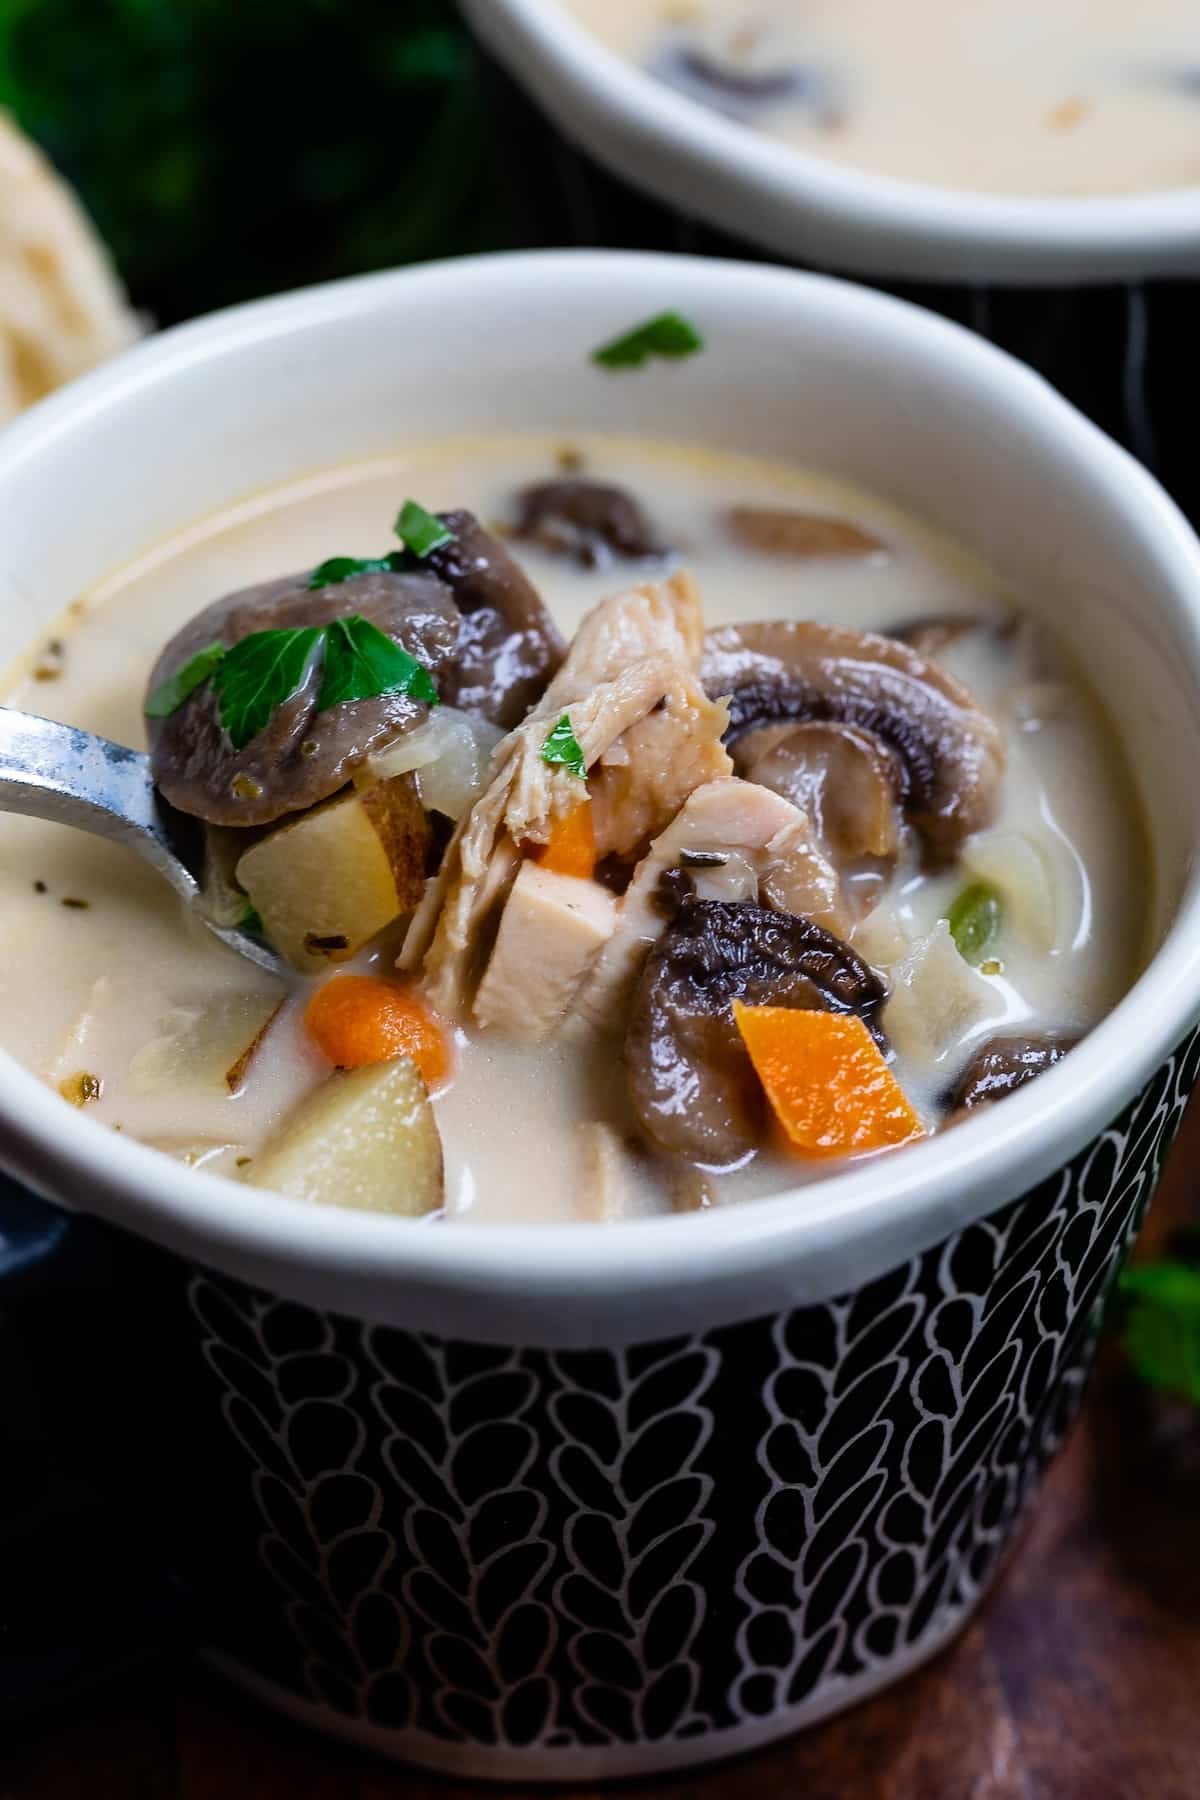 soup with mushrooms in it in a dark blue bowl with a spoon inside.